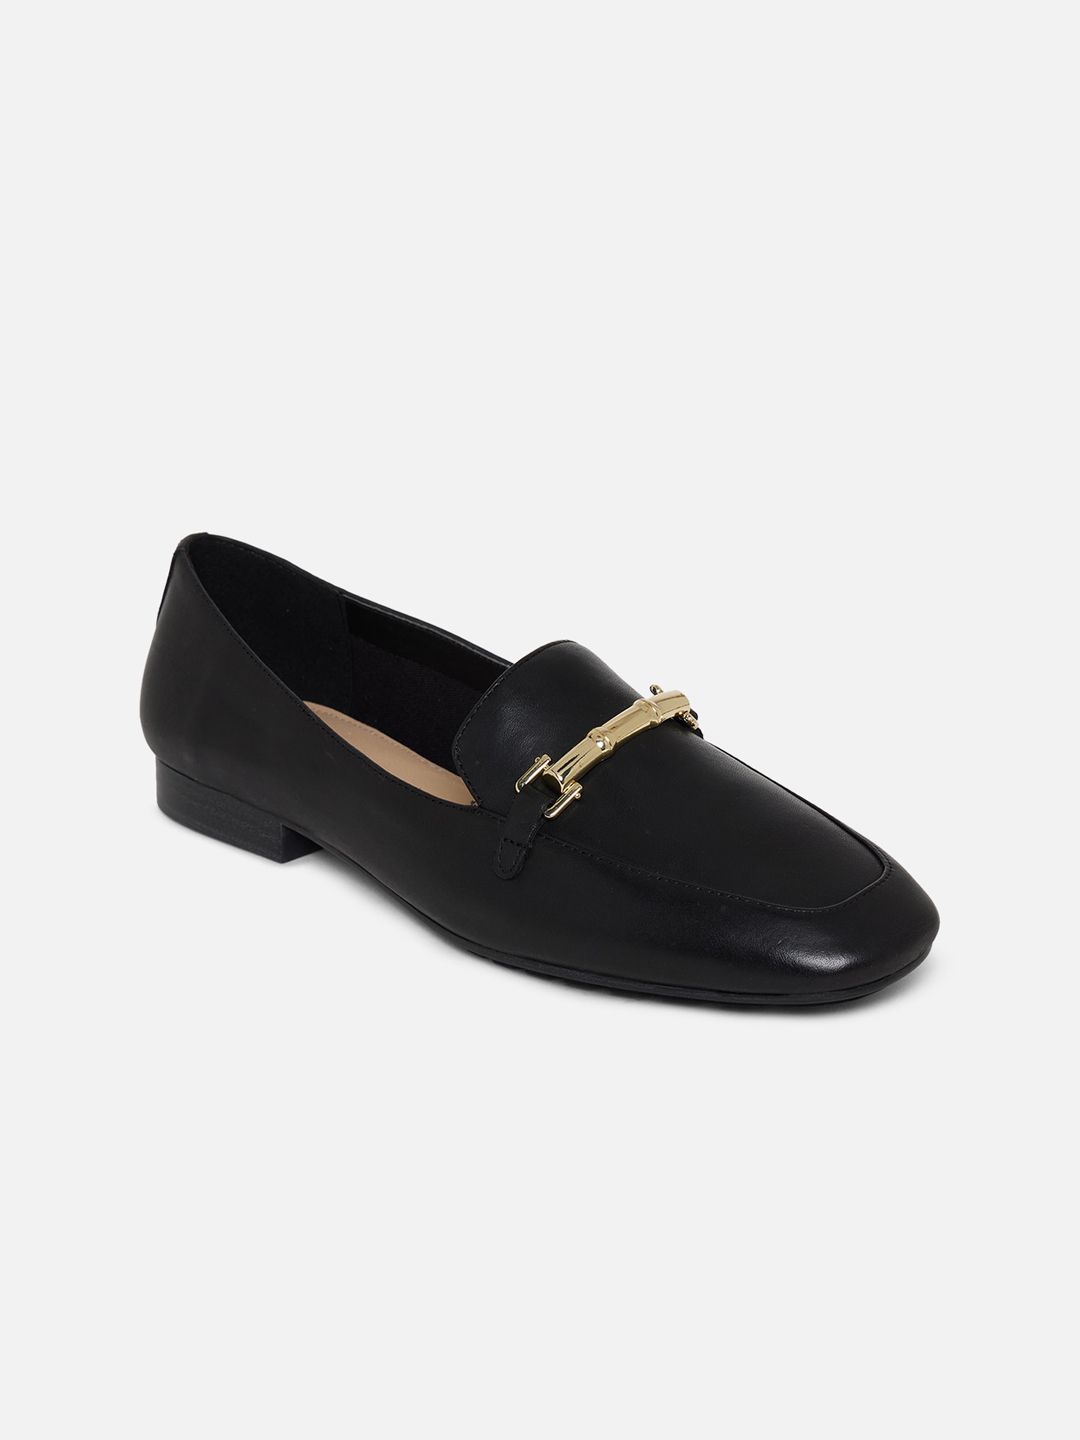 ALDO Women Black Solid Leather Loafers Price in India